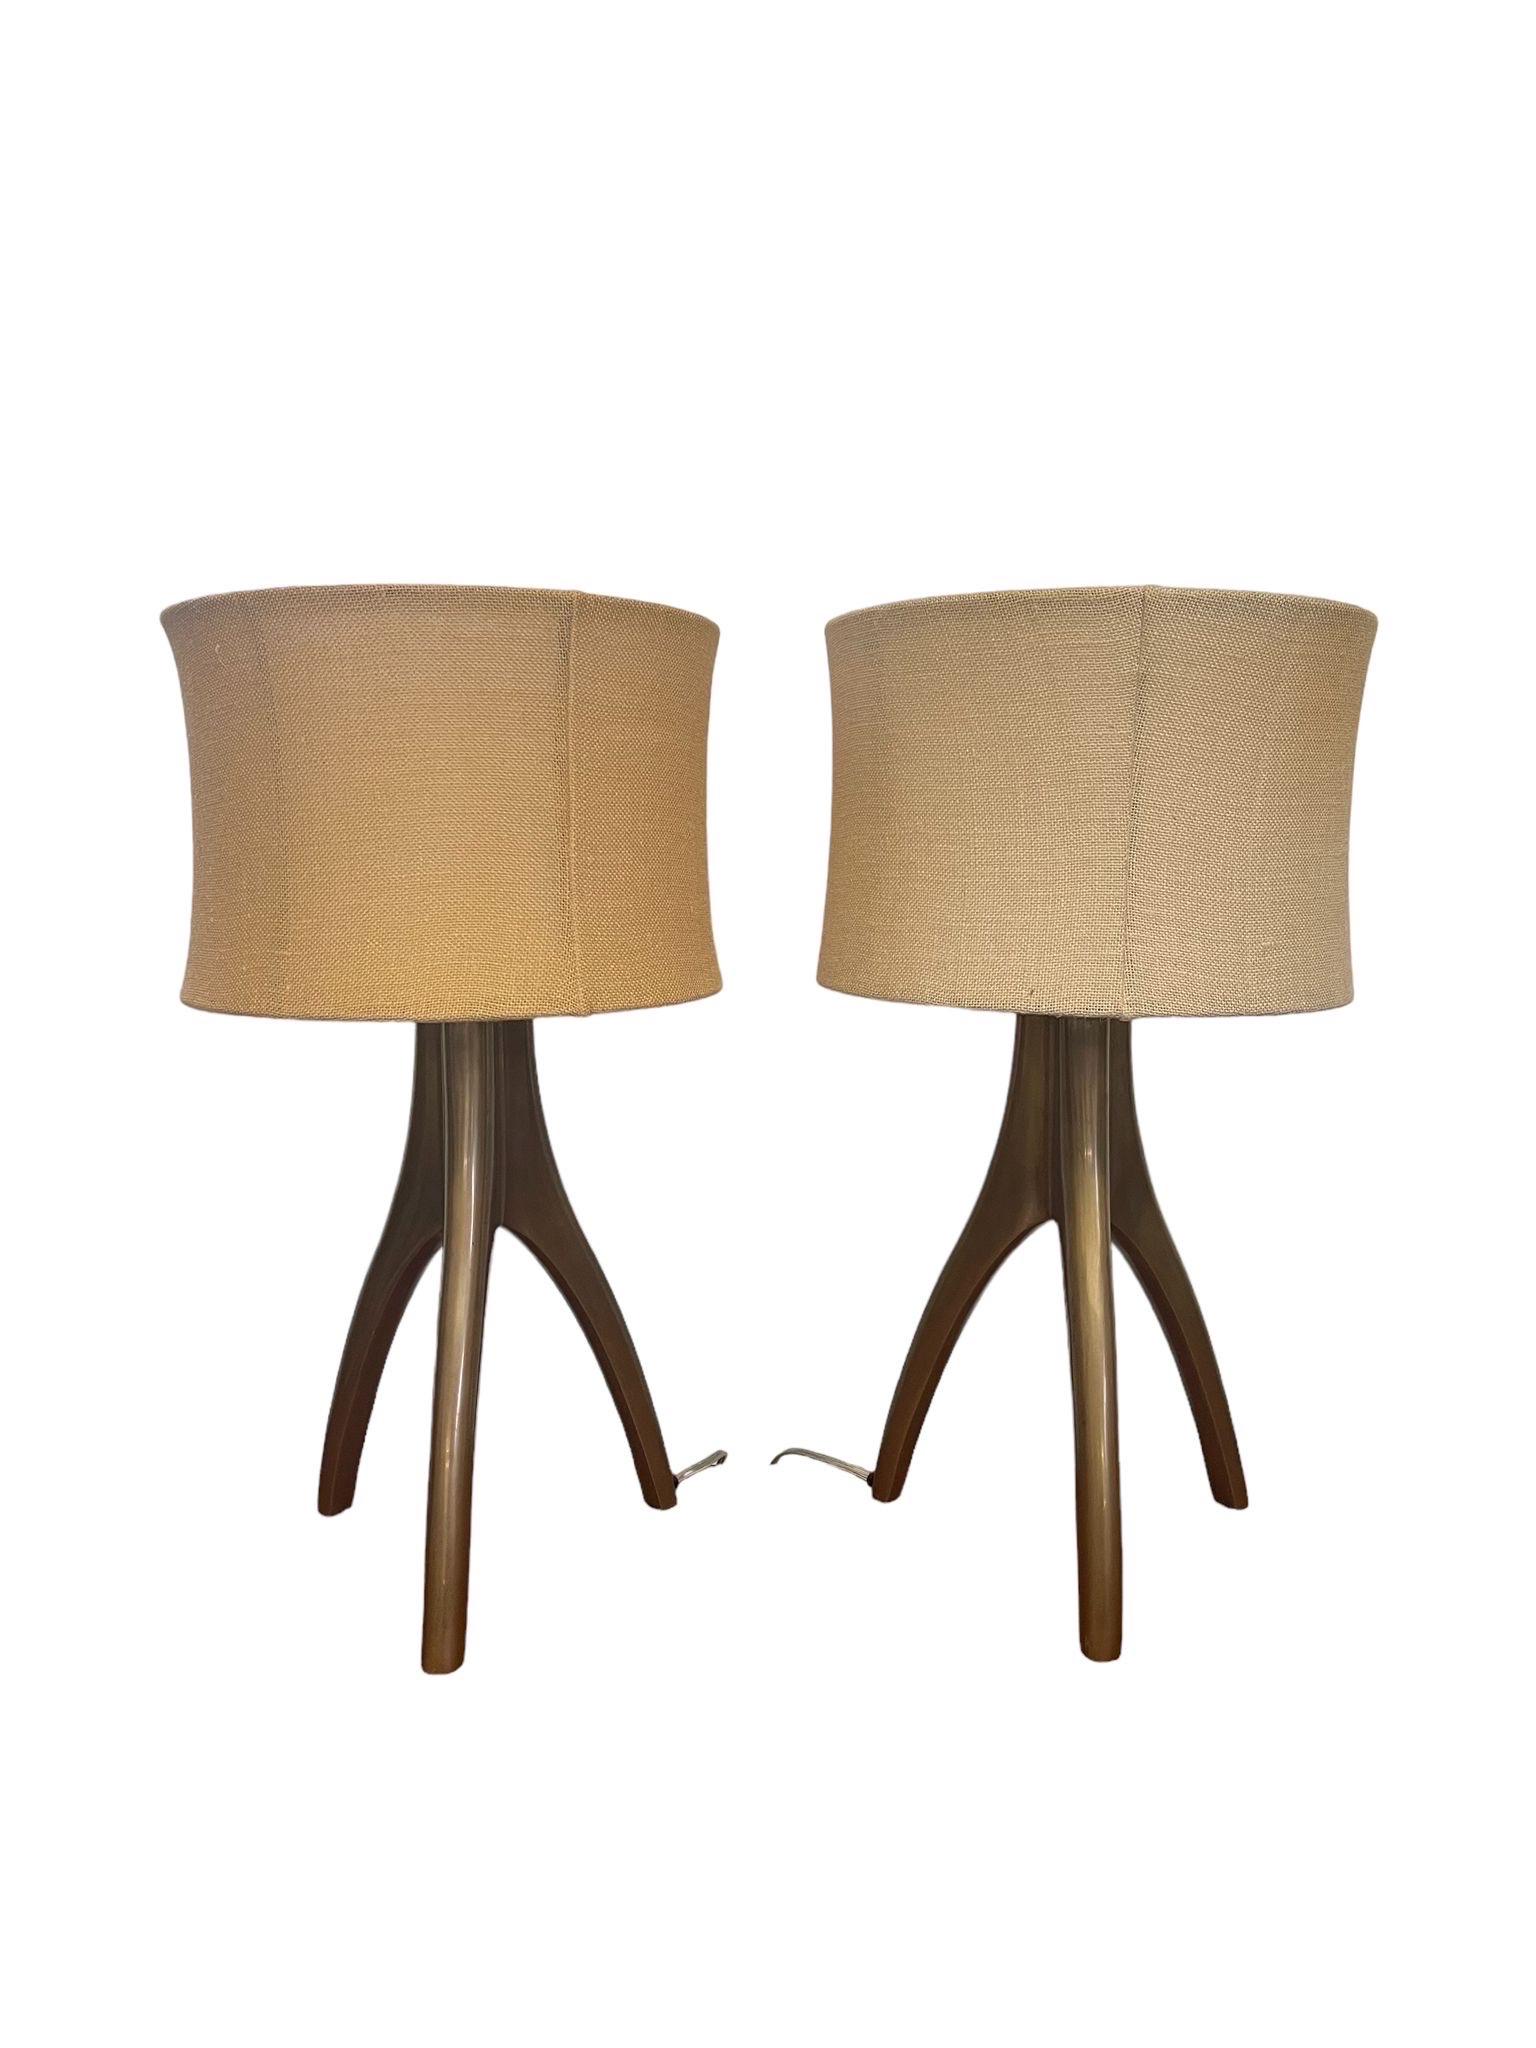 Wood Mid Century Modern Inspired Table Lamps . Set of 2 For Sale